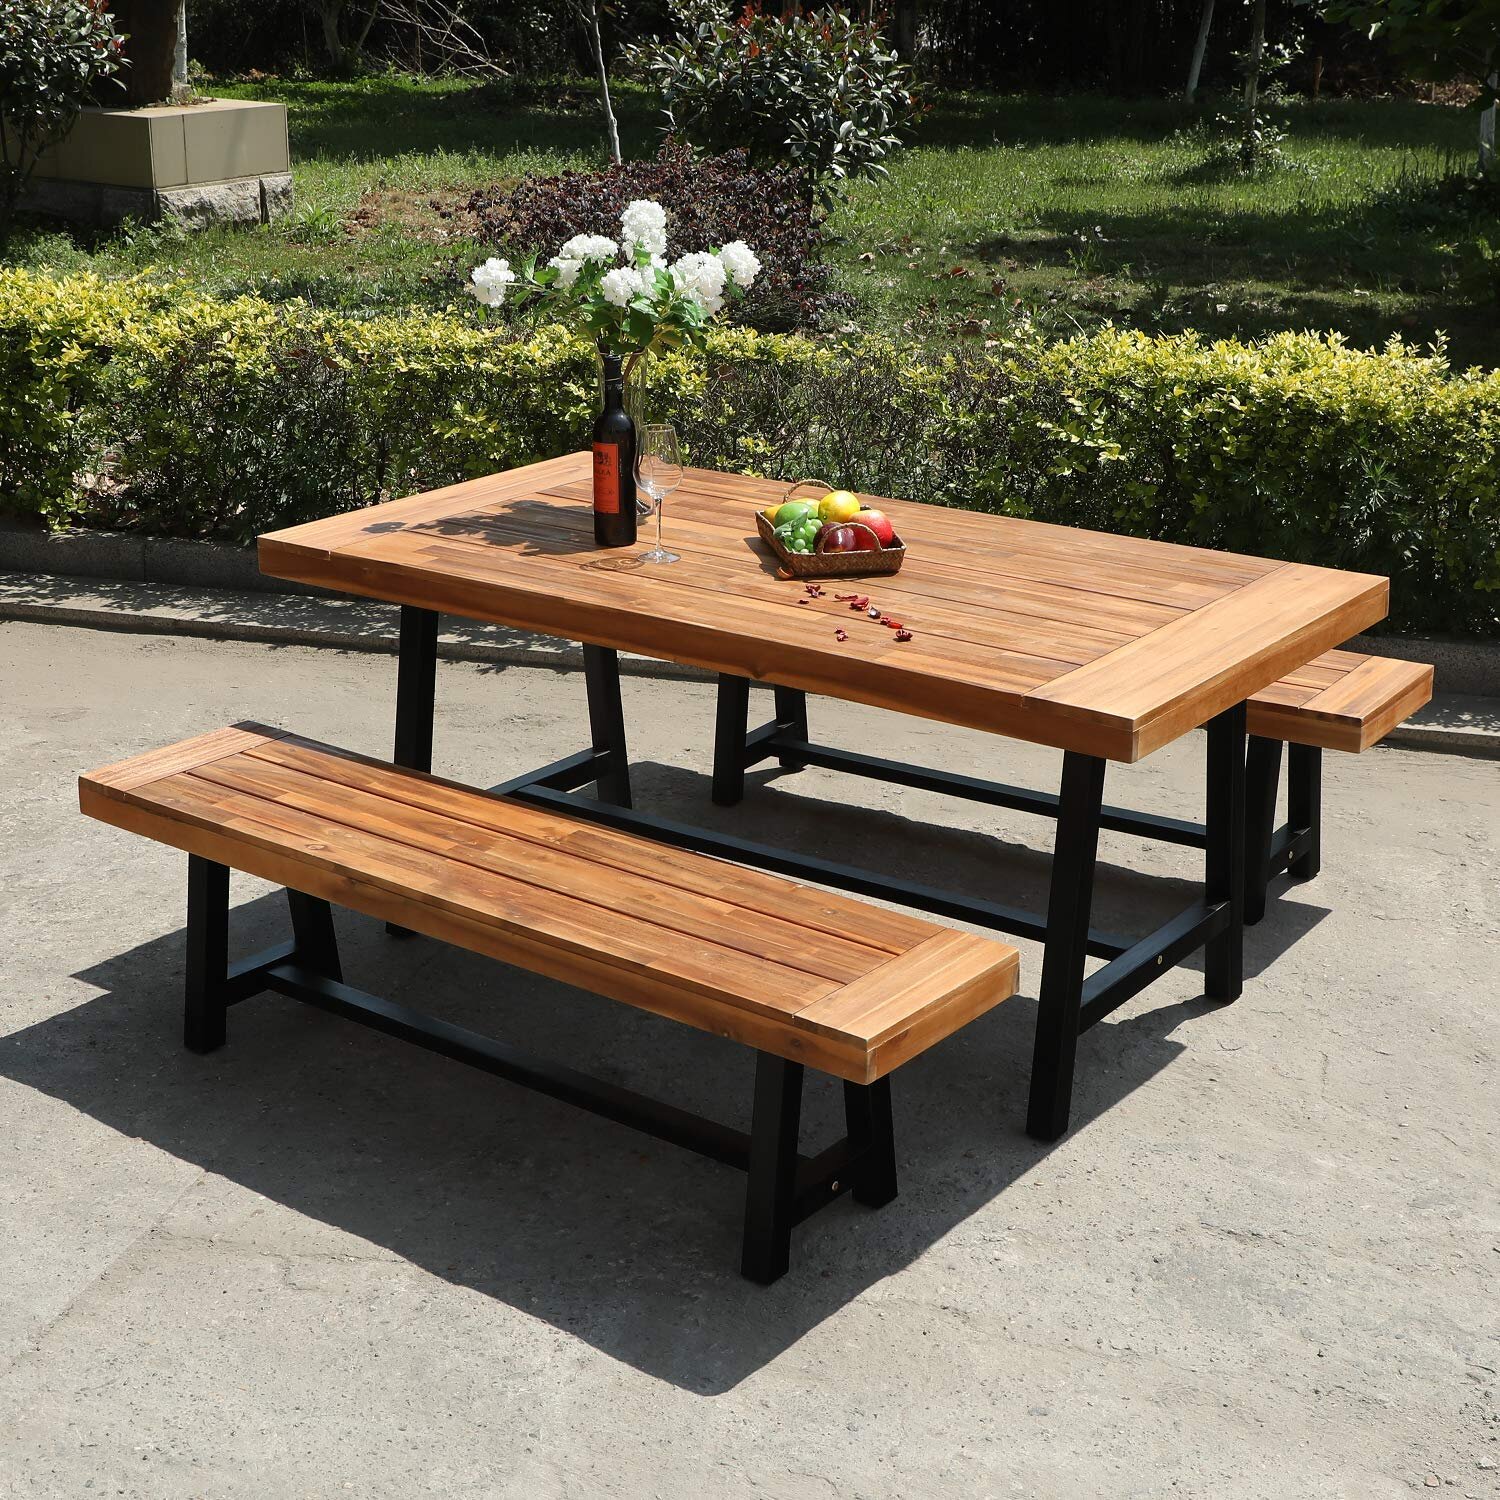 Dining Set With Bench Material : Free Images Outdoor Table Coffee Table